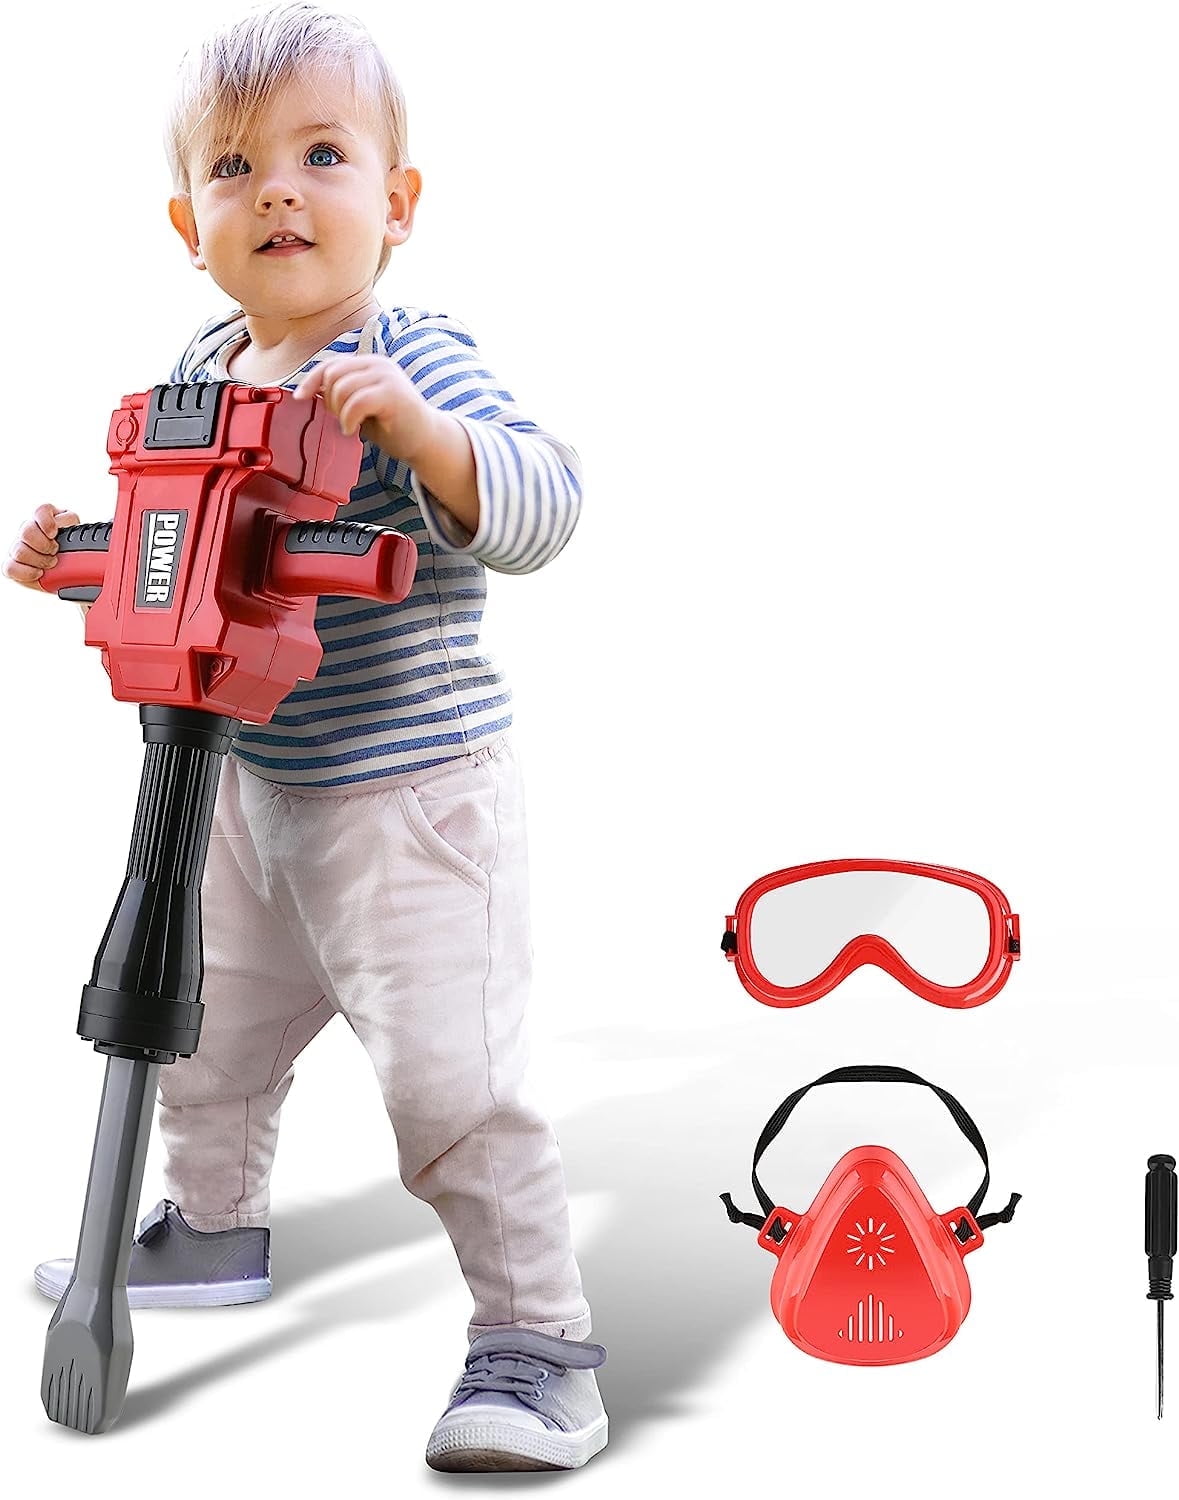 YCFUN Kids Toys, YCFUN Pretend Play Jack Hammer Toy with Realistic Action  and Sound, Power ABS Tools for Childs Boys Girls Aged 3-5,4-7